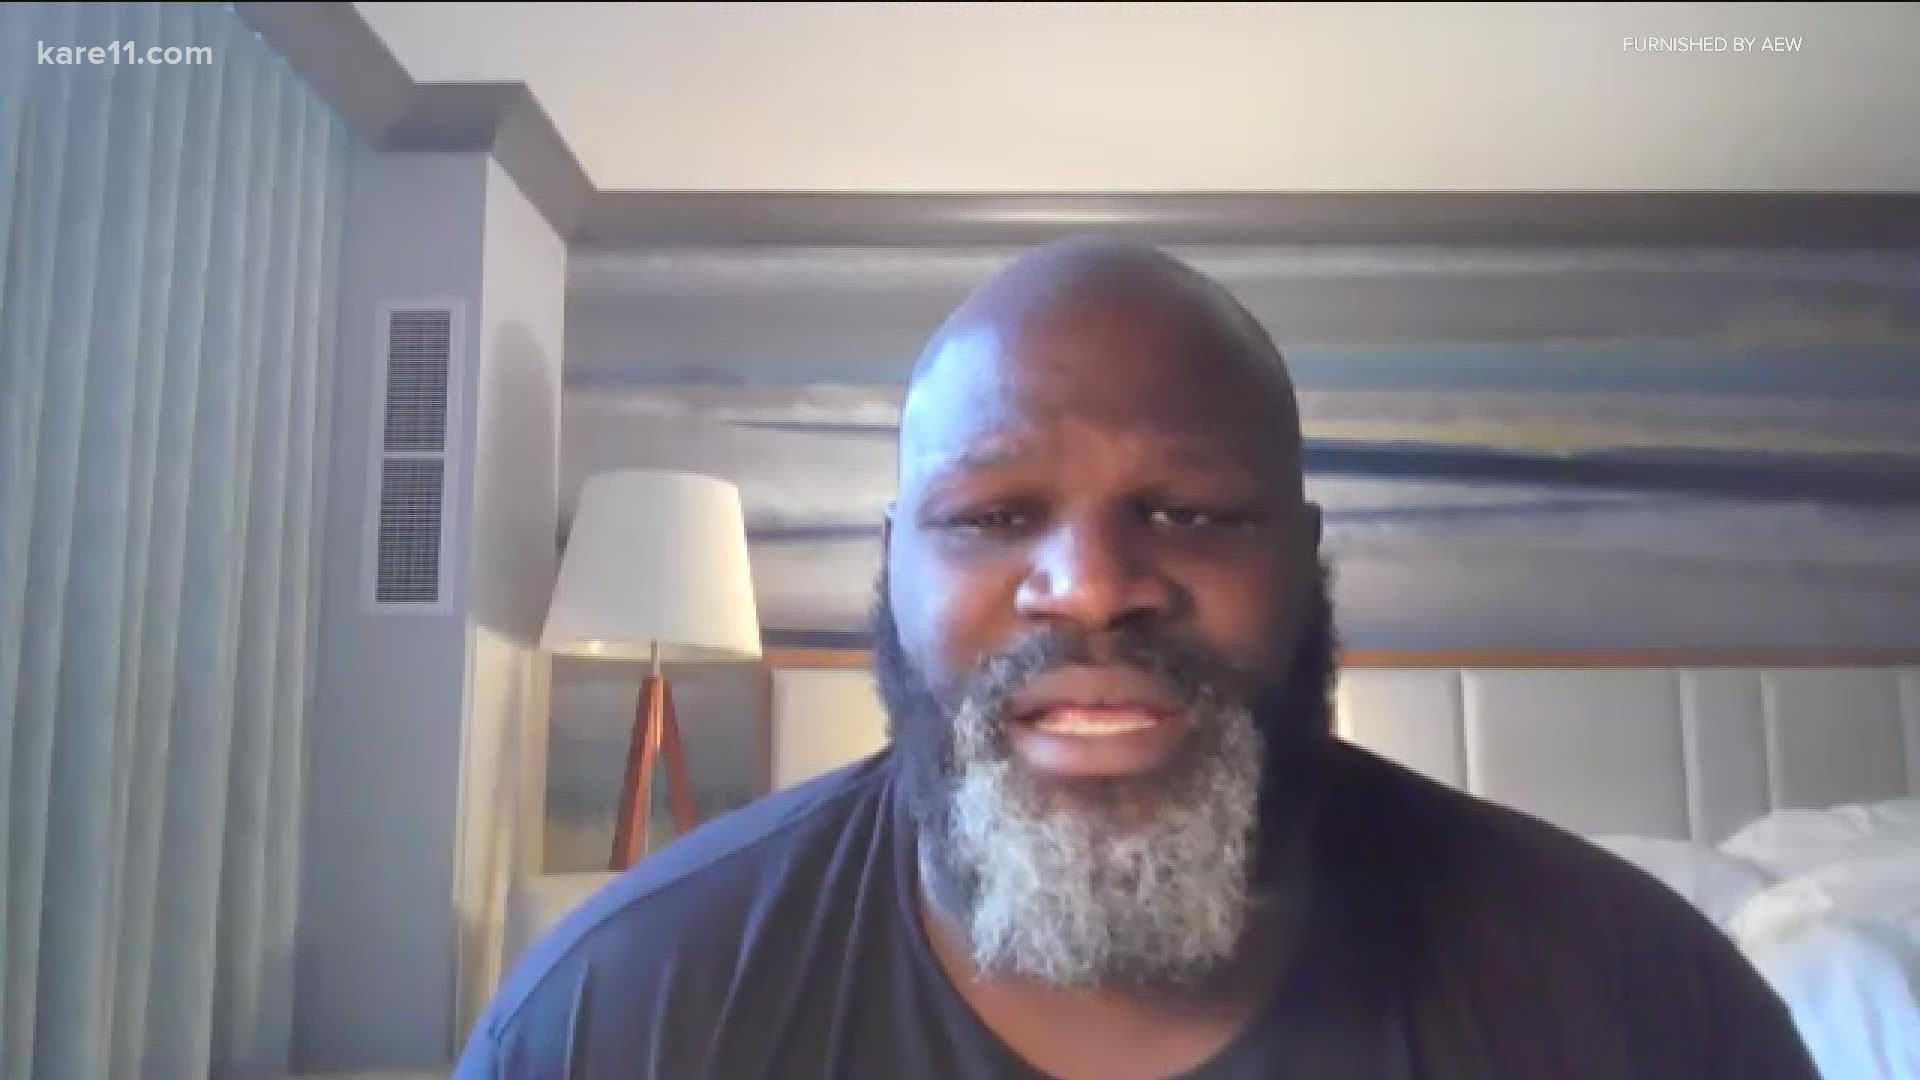 AEW's Mark Henry talks about the atmosphere at their live wrestling events.